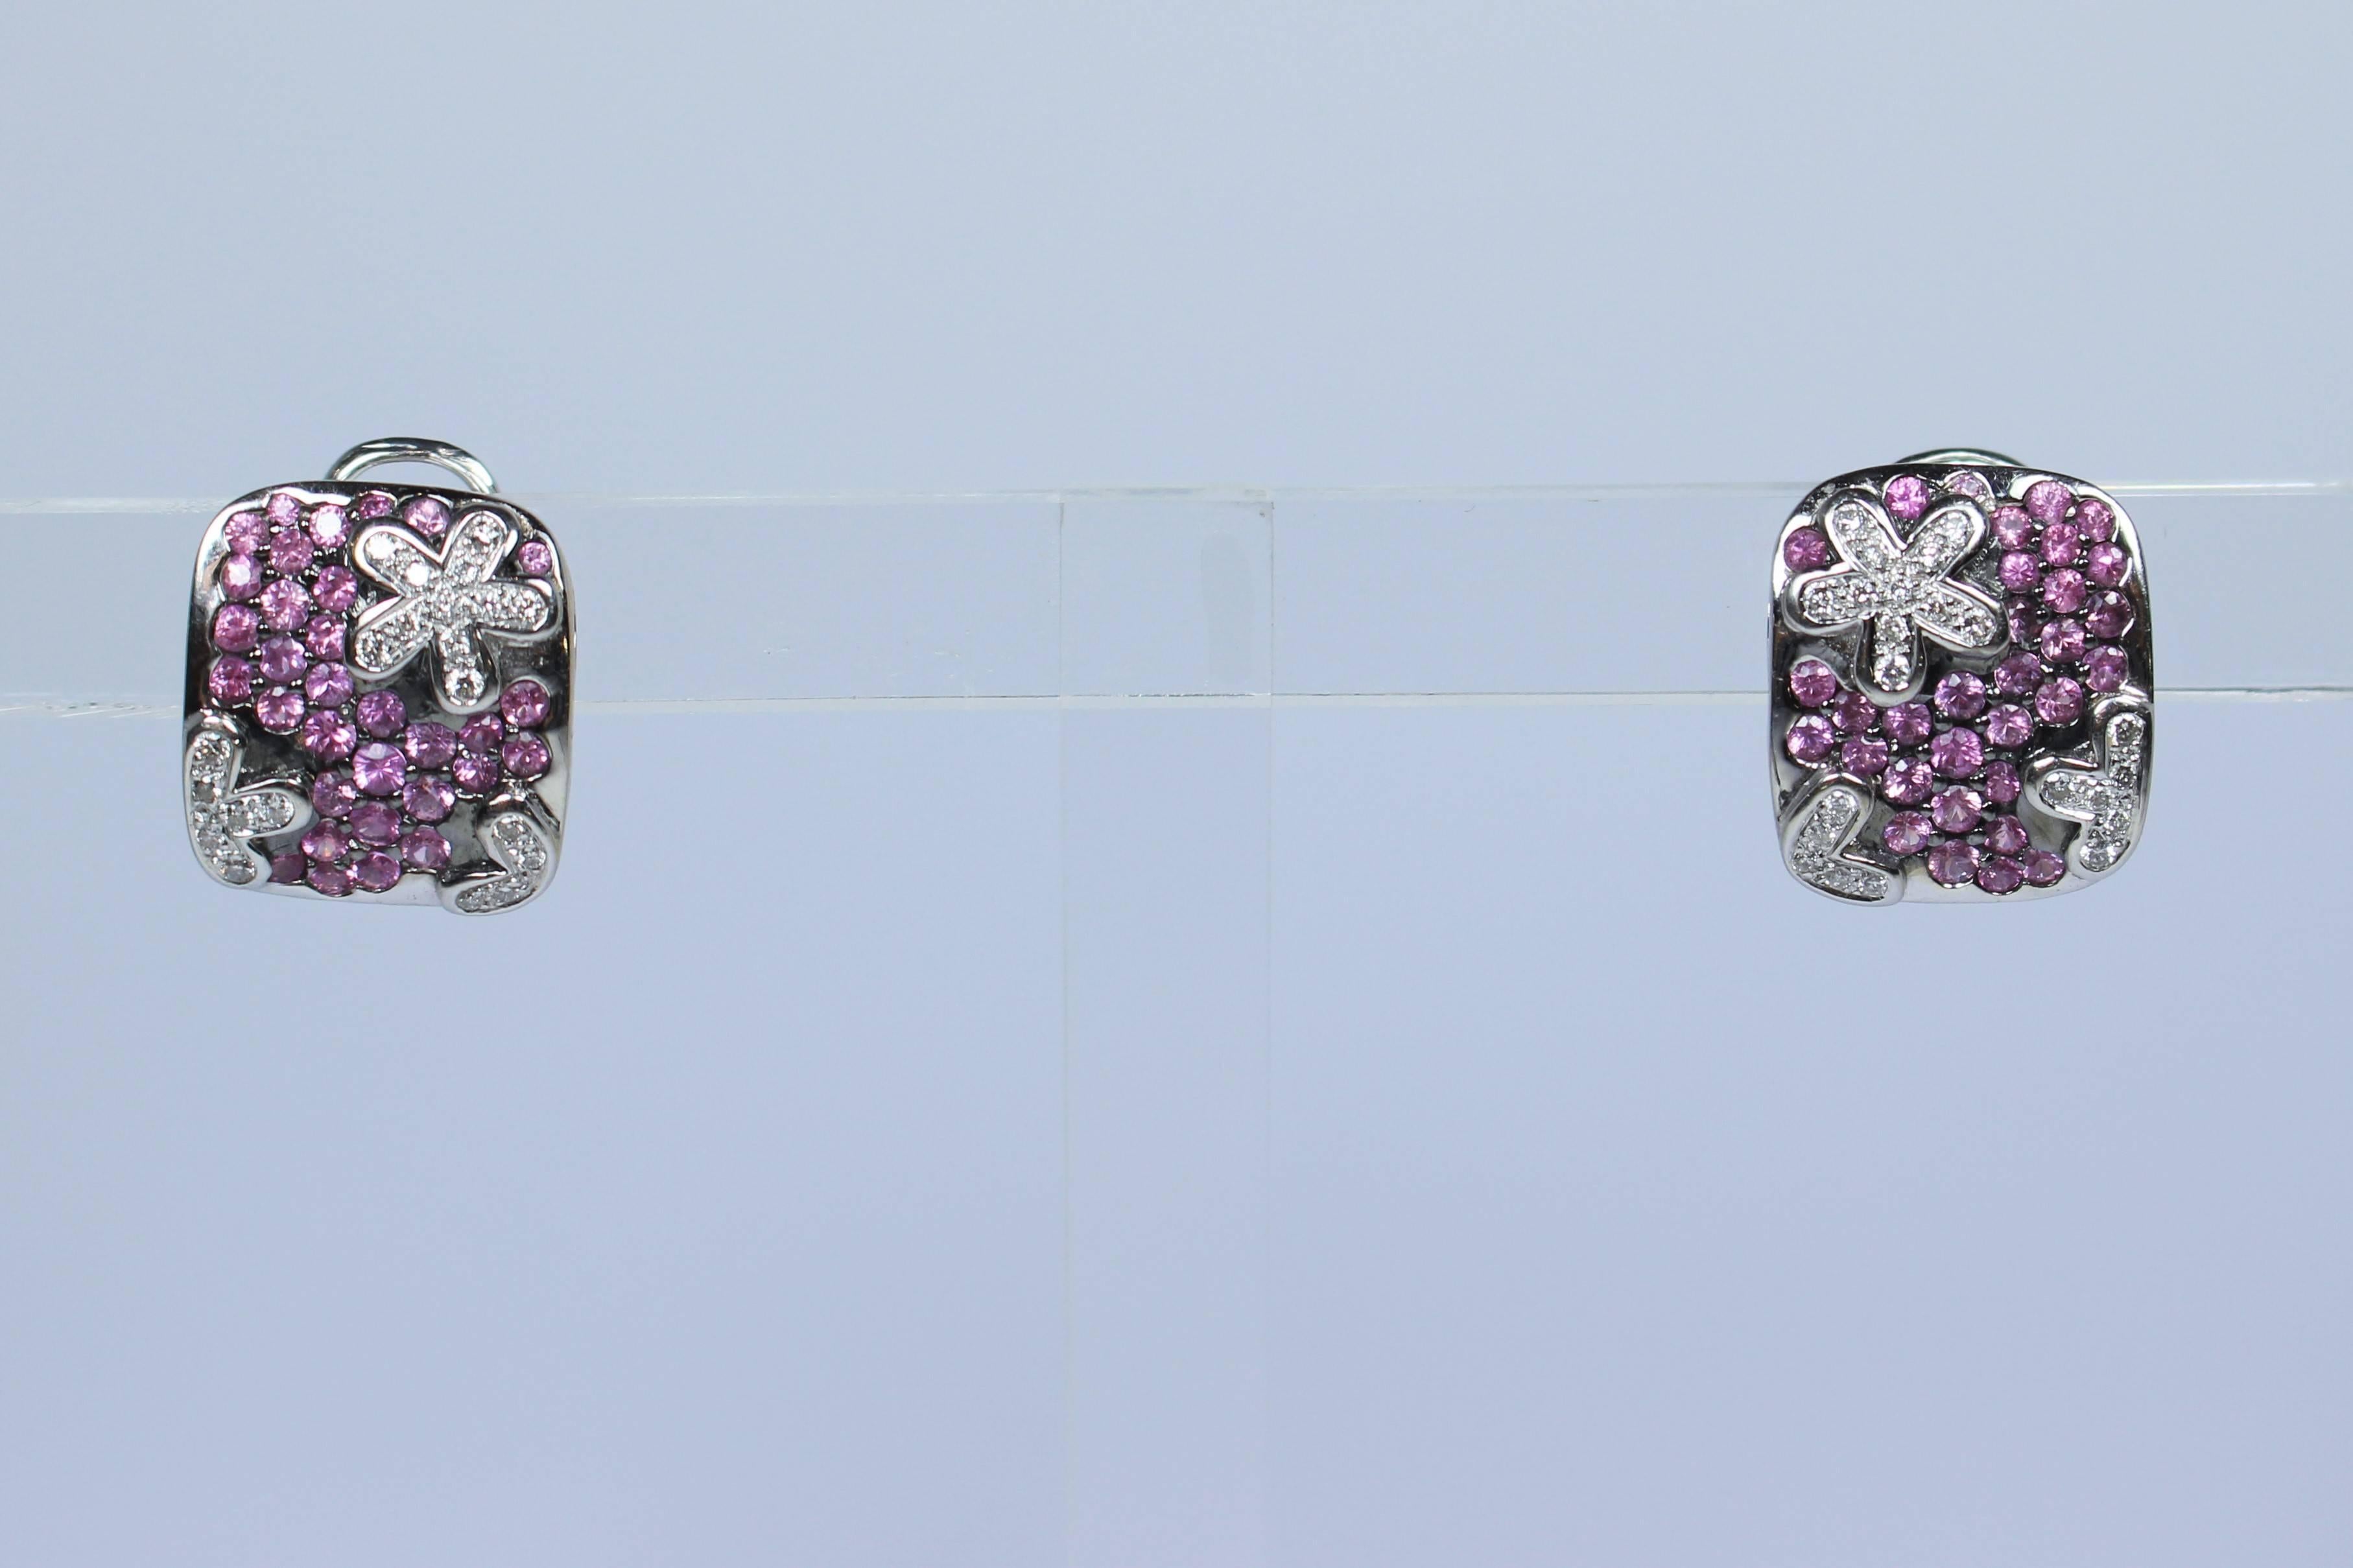 Women's Cristina Ferrare Pave Pink Tourmaline and Diamond Gold Ring and Earring Set